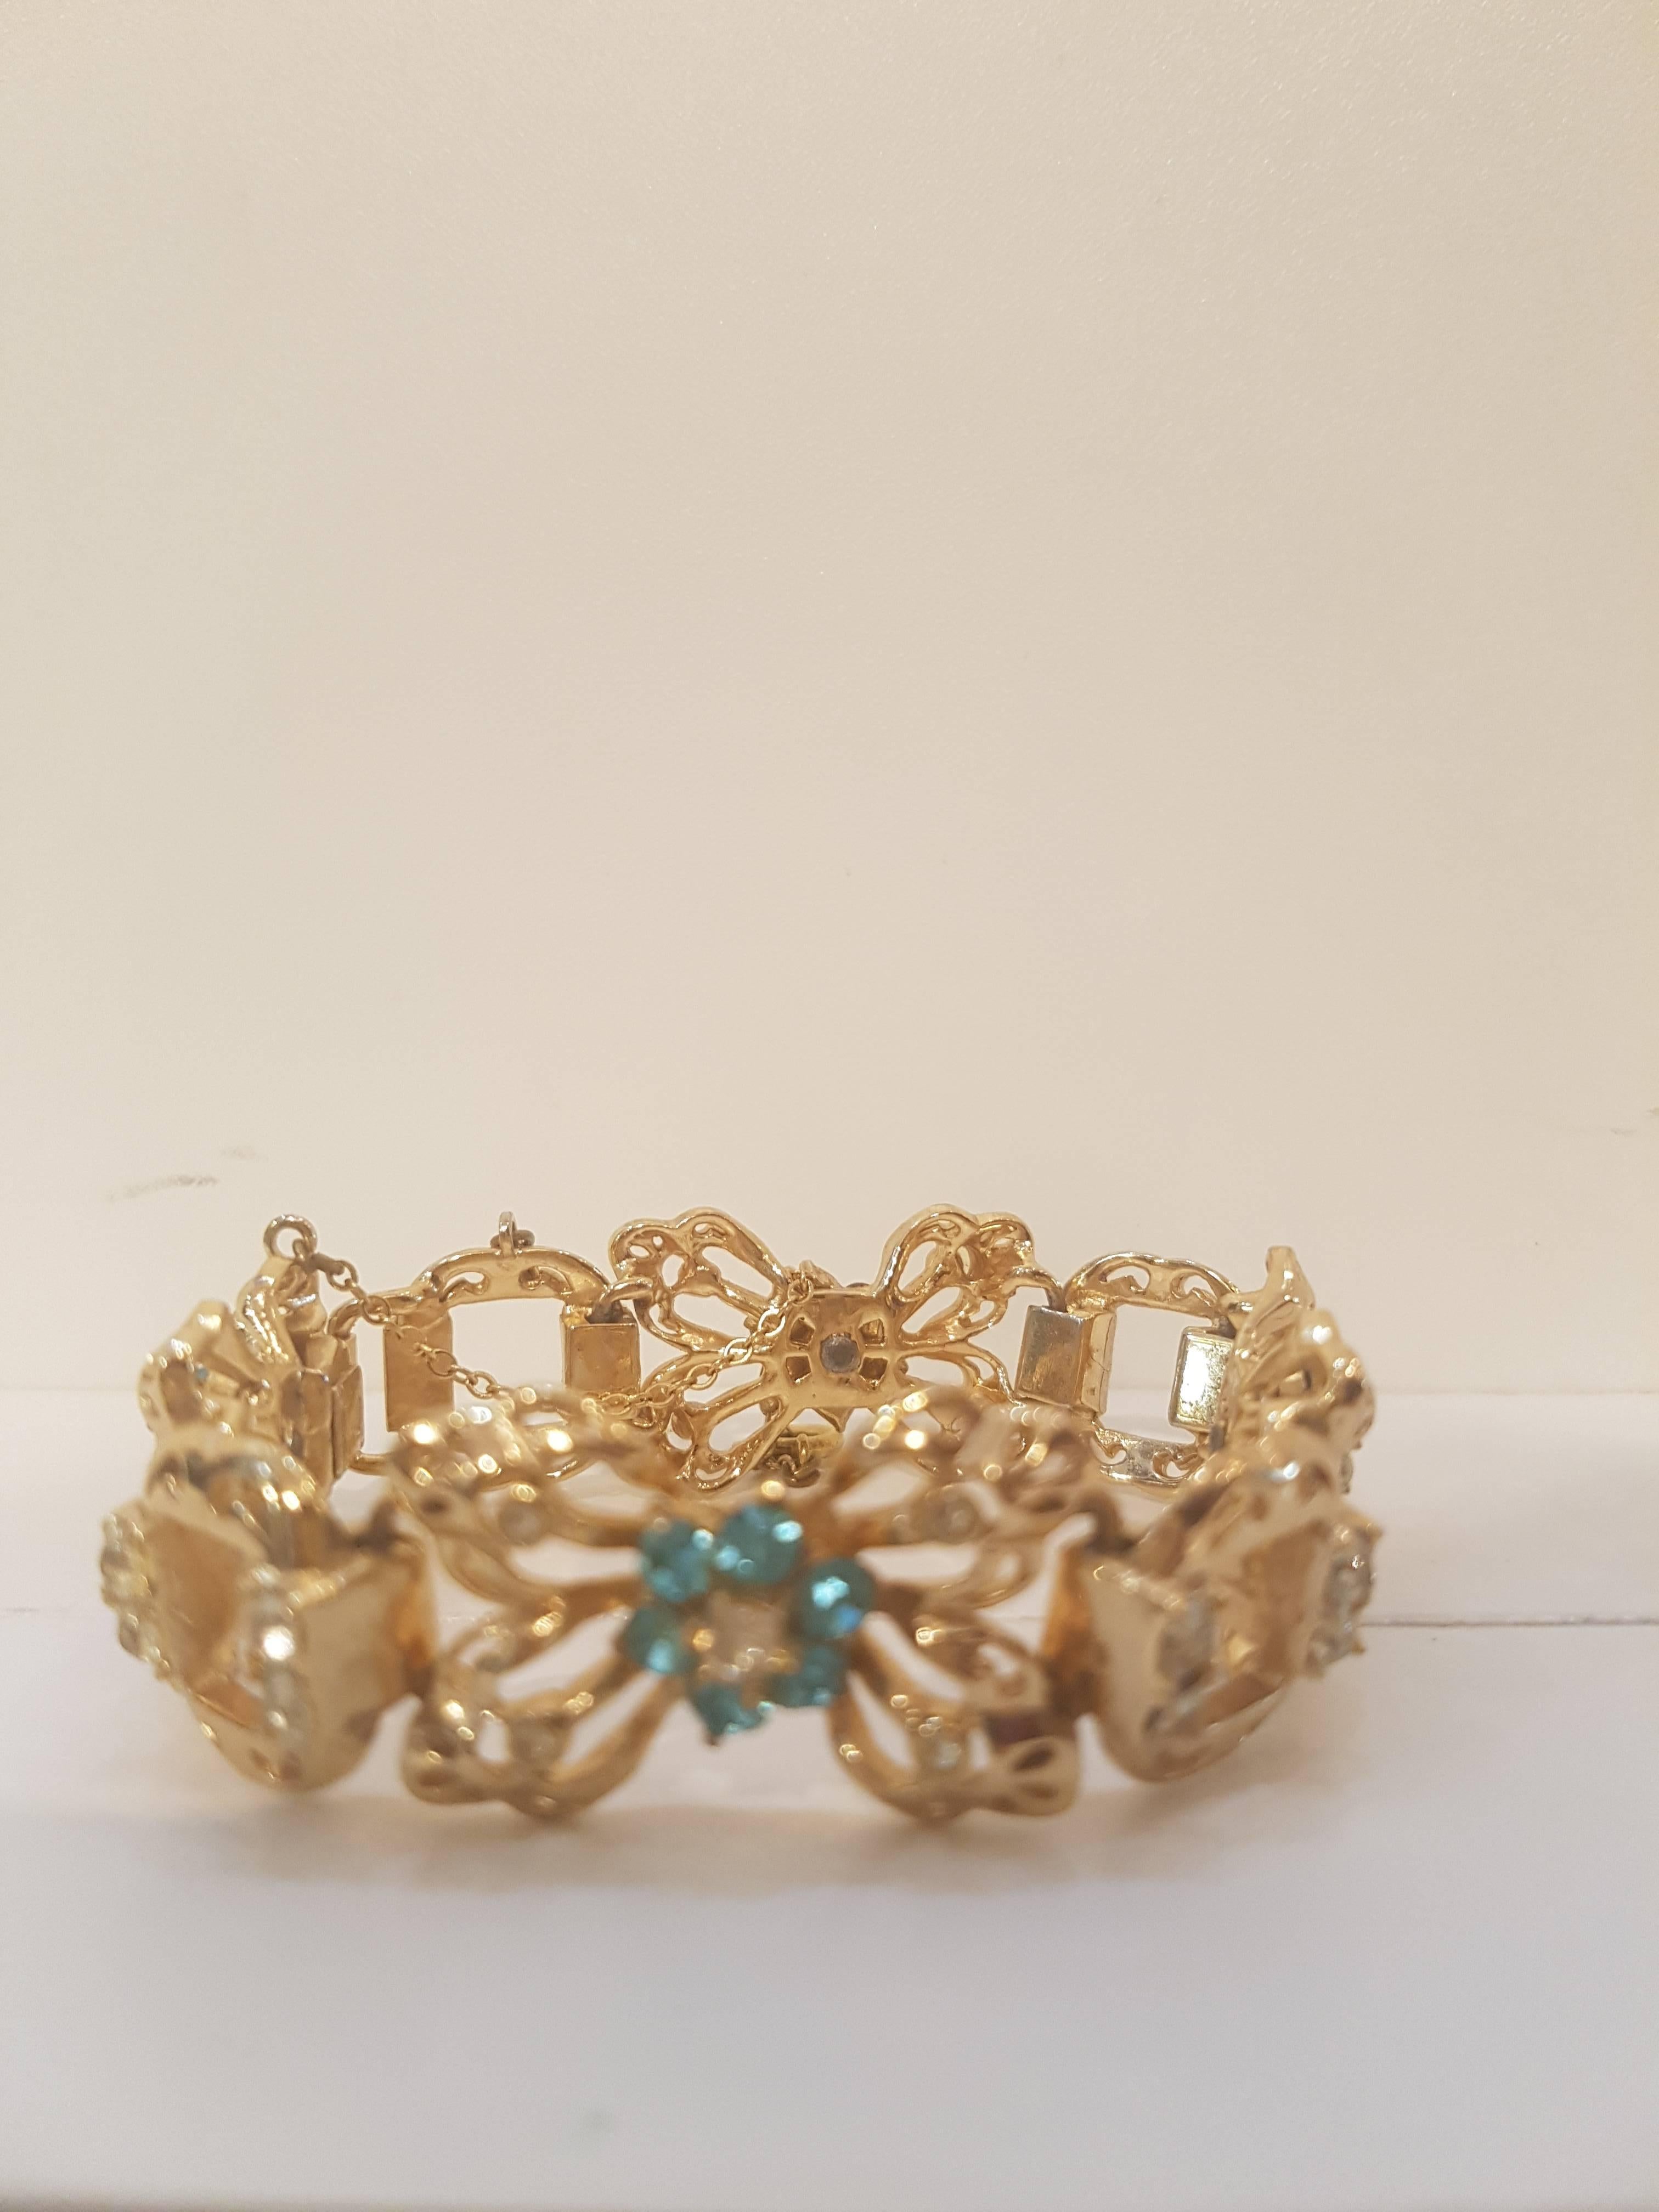 1980s Coro gold tone bracelet with crystal and light blu stones